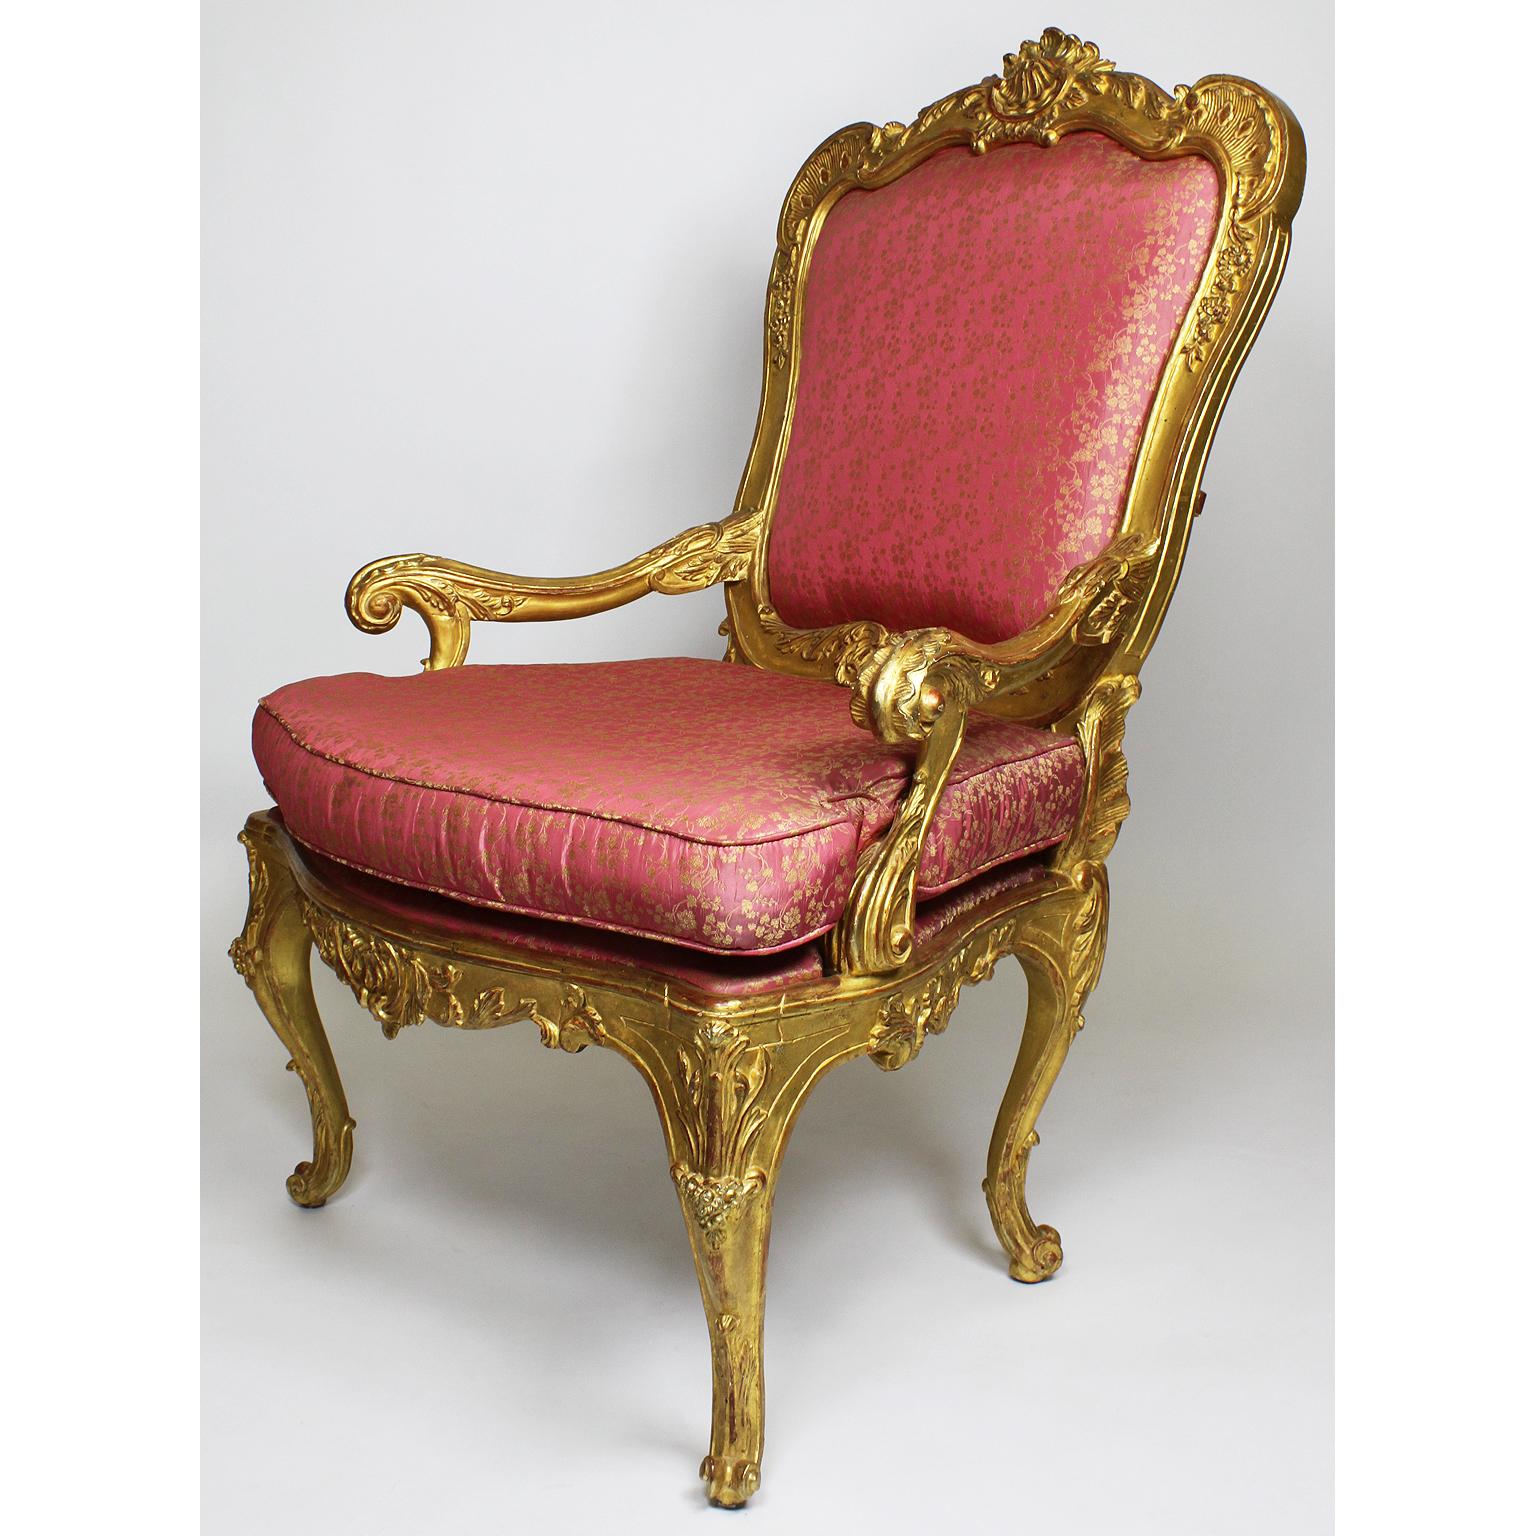 A fine pair of Italian venetian rococo revival style giltwood carved throne armchairs. The ornately carved frames with wide open and scrolled armrests, a padded backrest crowned with a giltwood carved shell crest and floral designs; raised on four